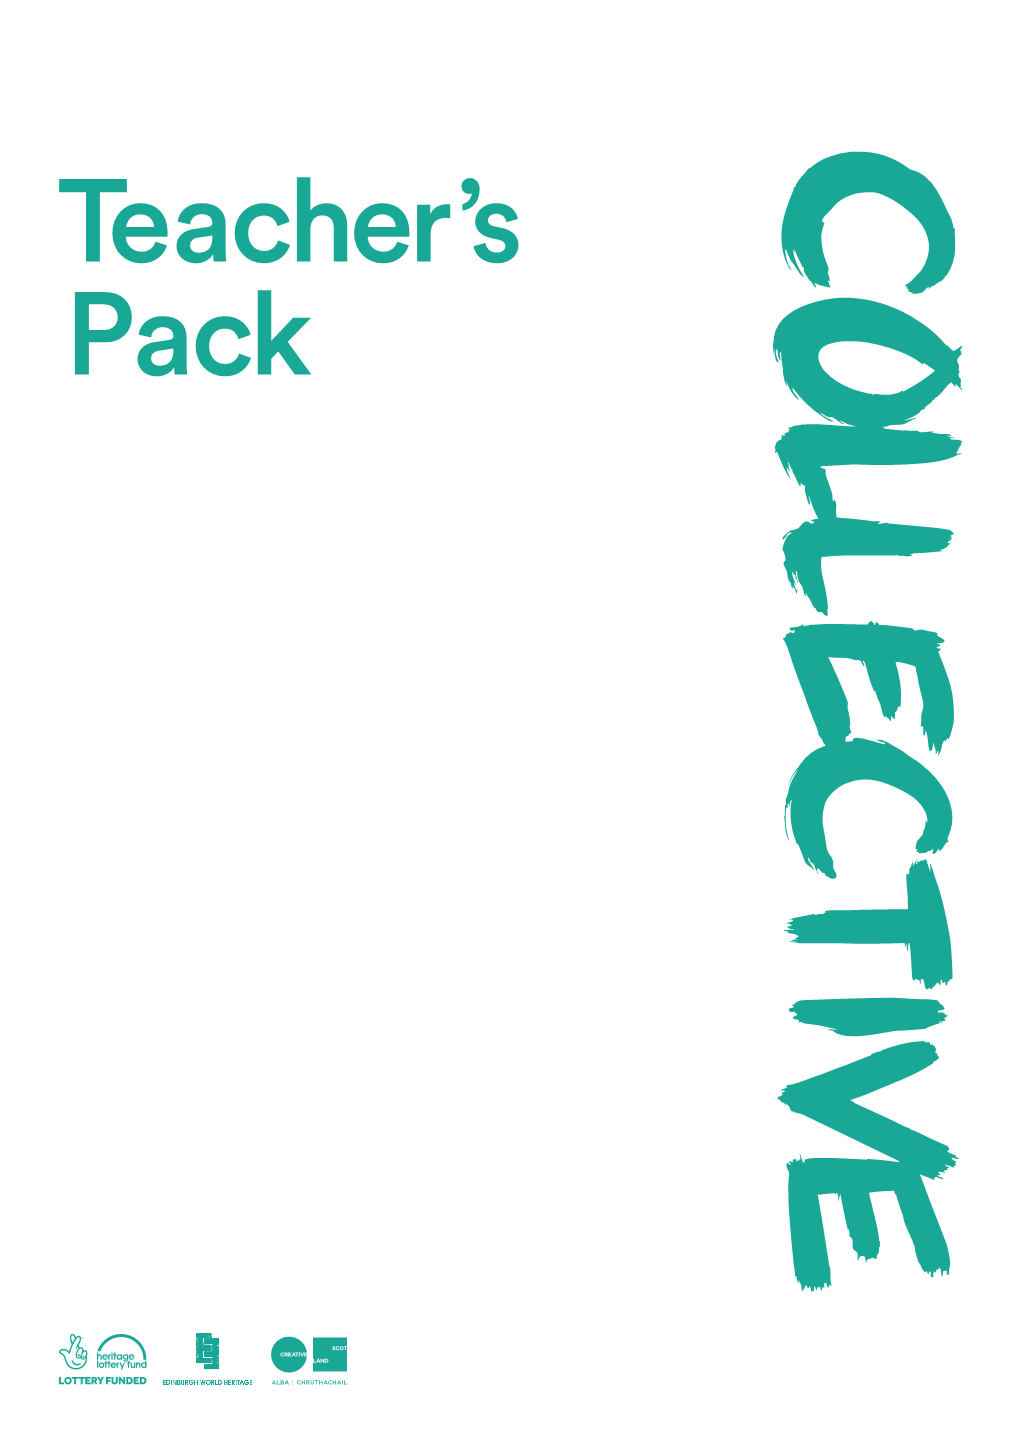 Collective Teacher's Pack Download